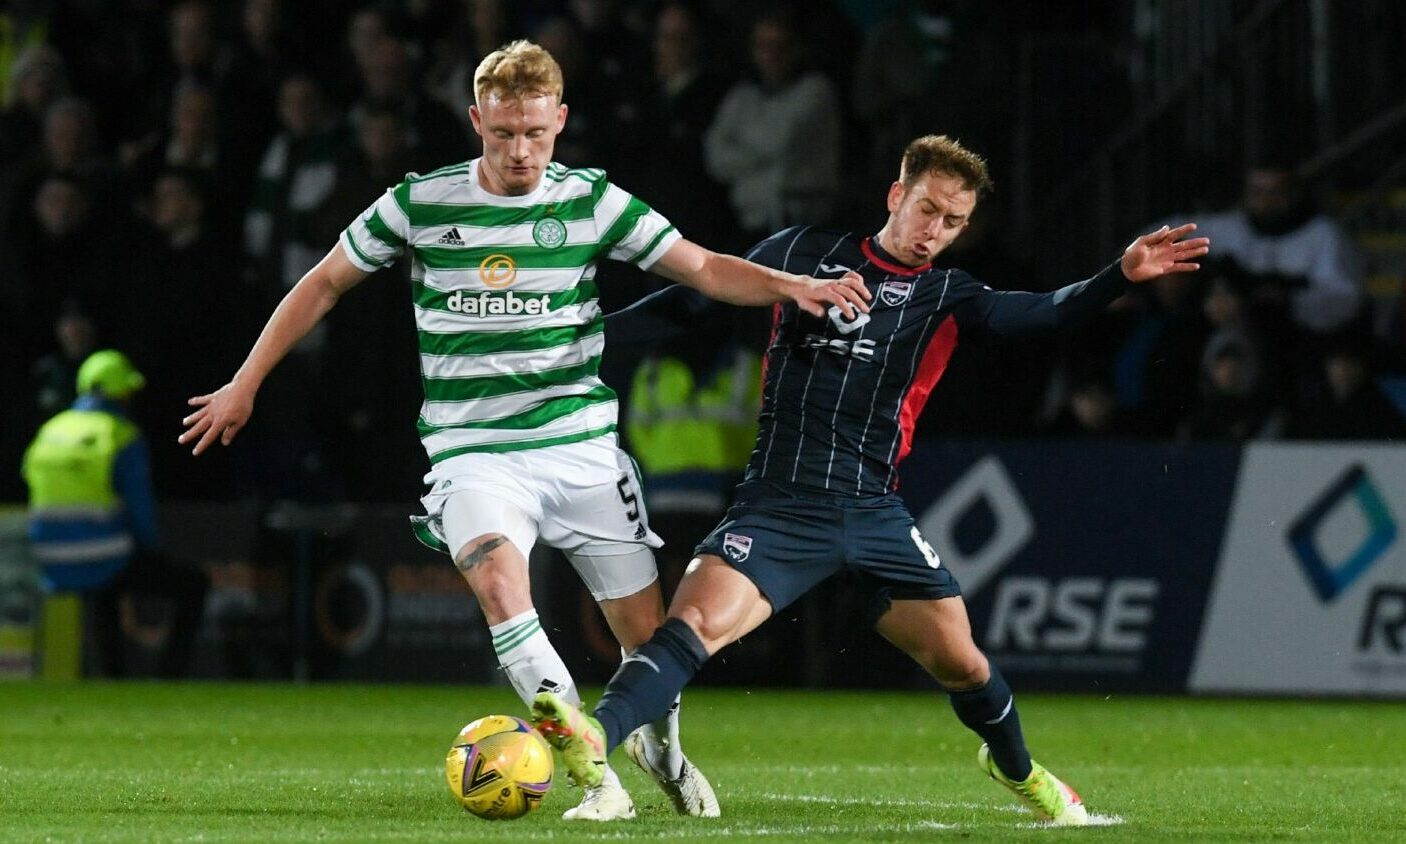 Celtic Liam Scales in action.